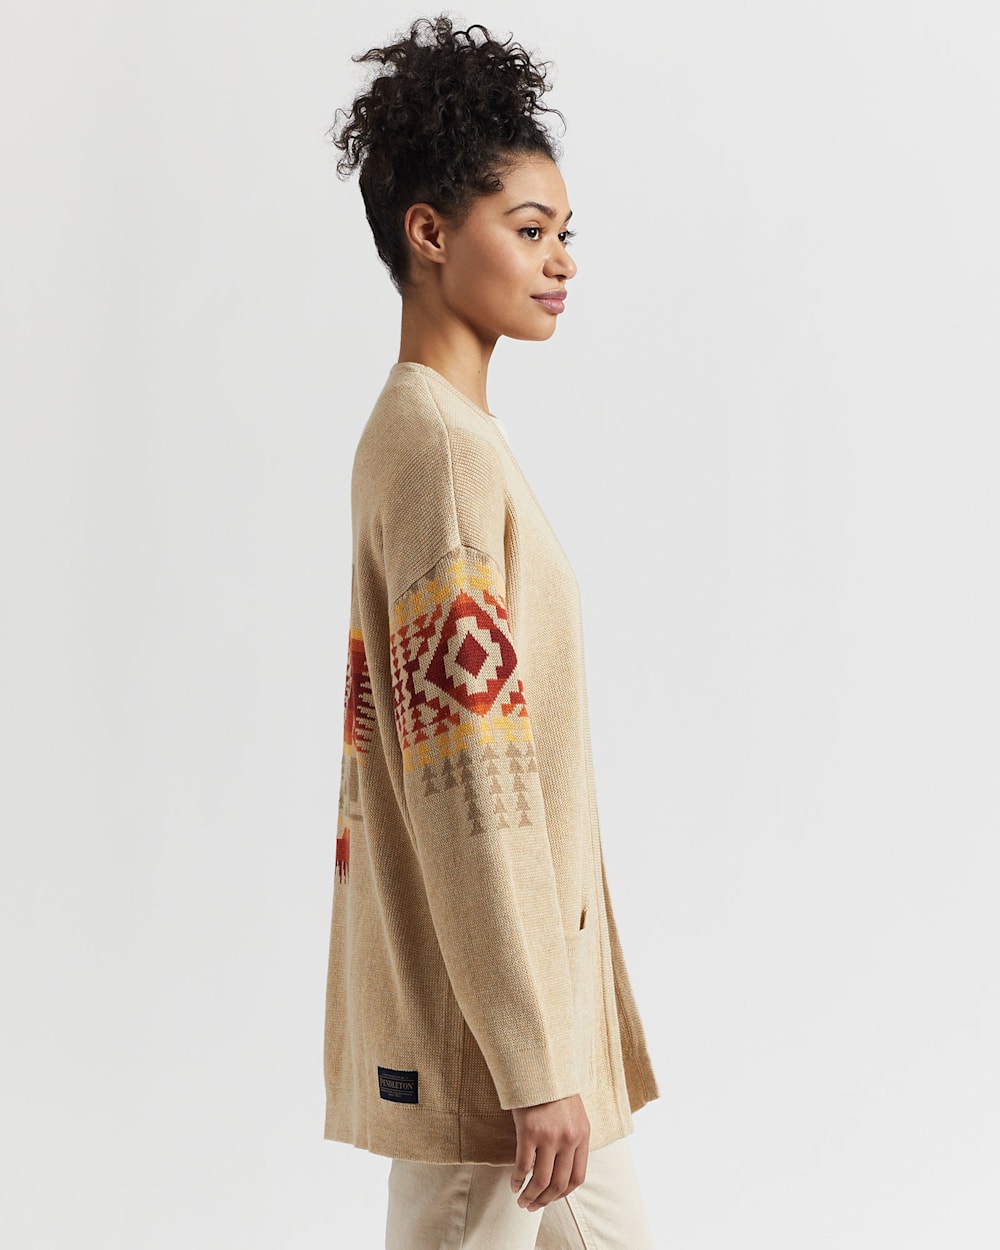 ALTERNATE VIEW OF WOMEN'S OPEN FRONT COTTON CARDIGAN IN WARM SAND CHIEF JOSEPH image number 3